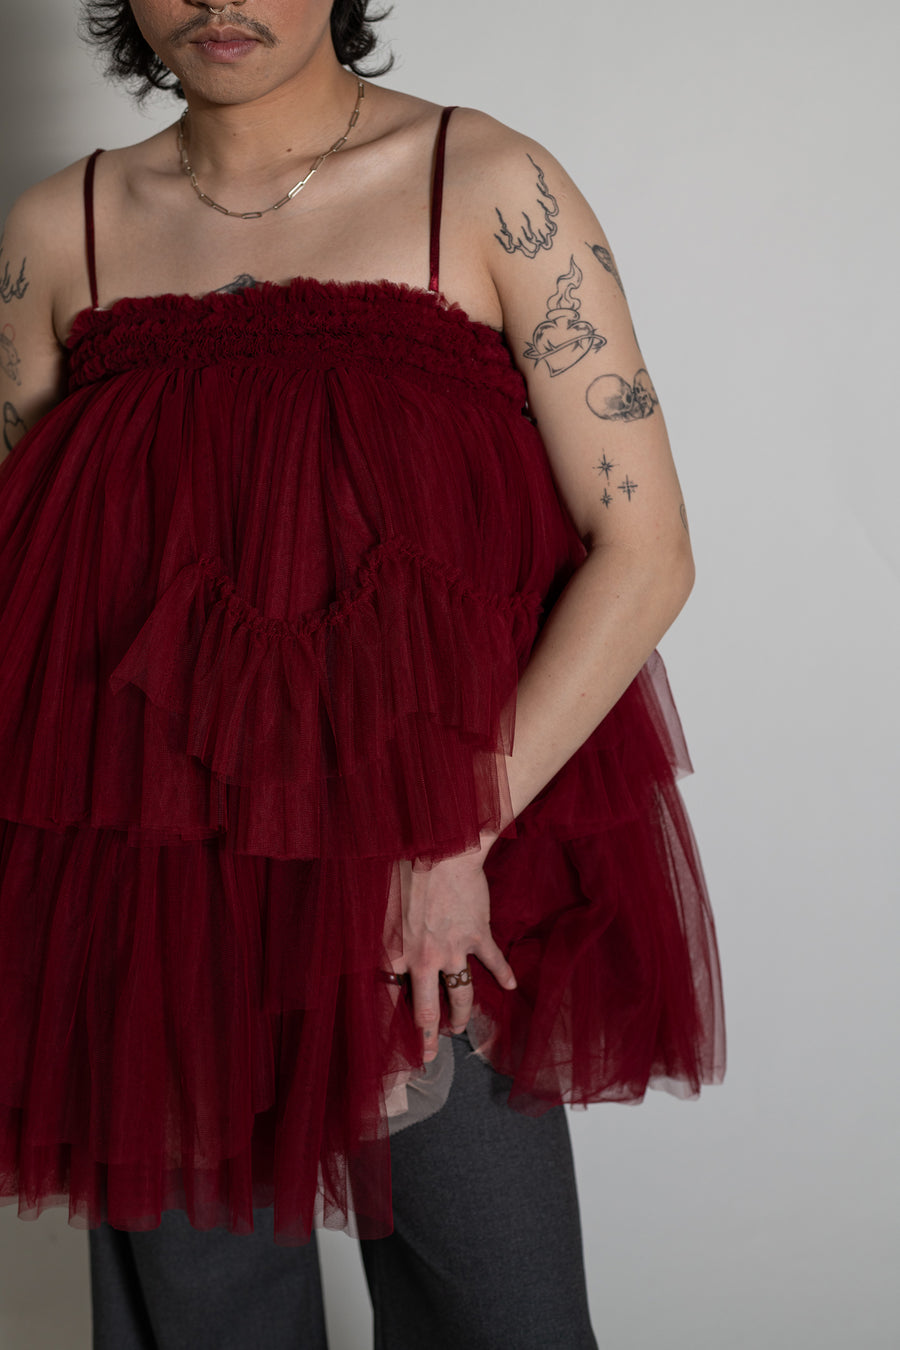 Jake wears the Maurice Tulle Mini Dress in deep red by House of Campbell.